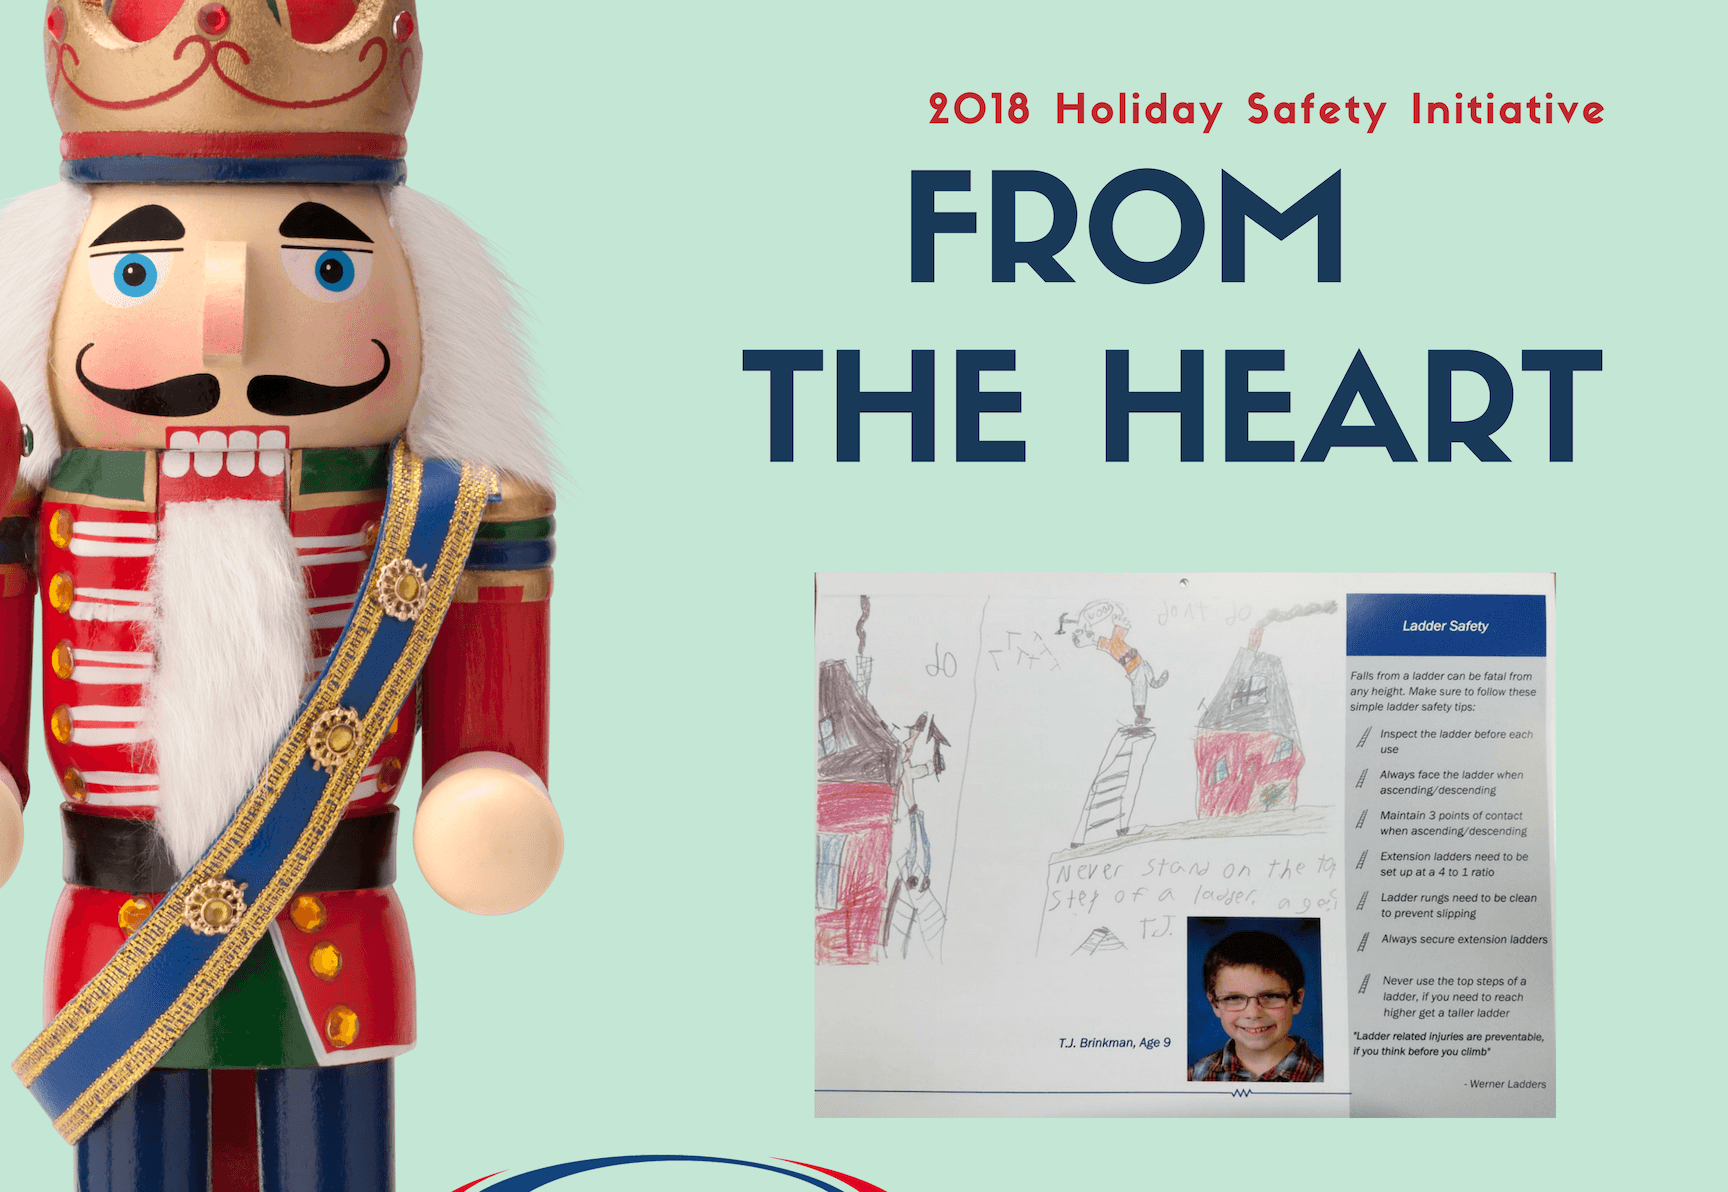 Update on the 2018 Holiday Safety Initiative